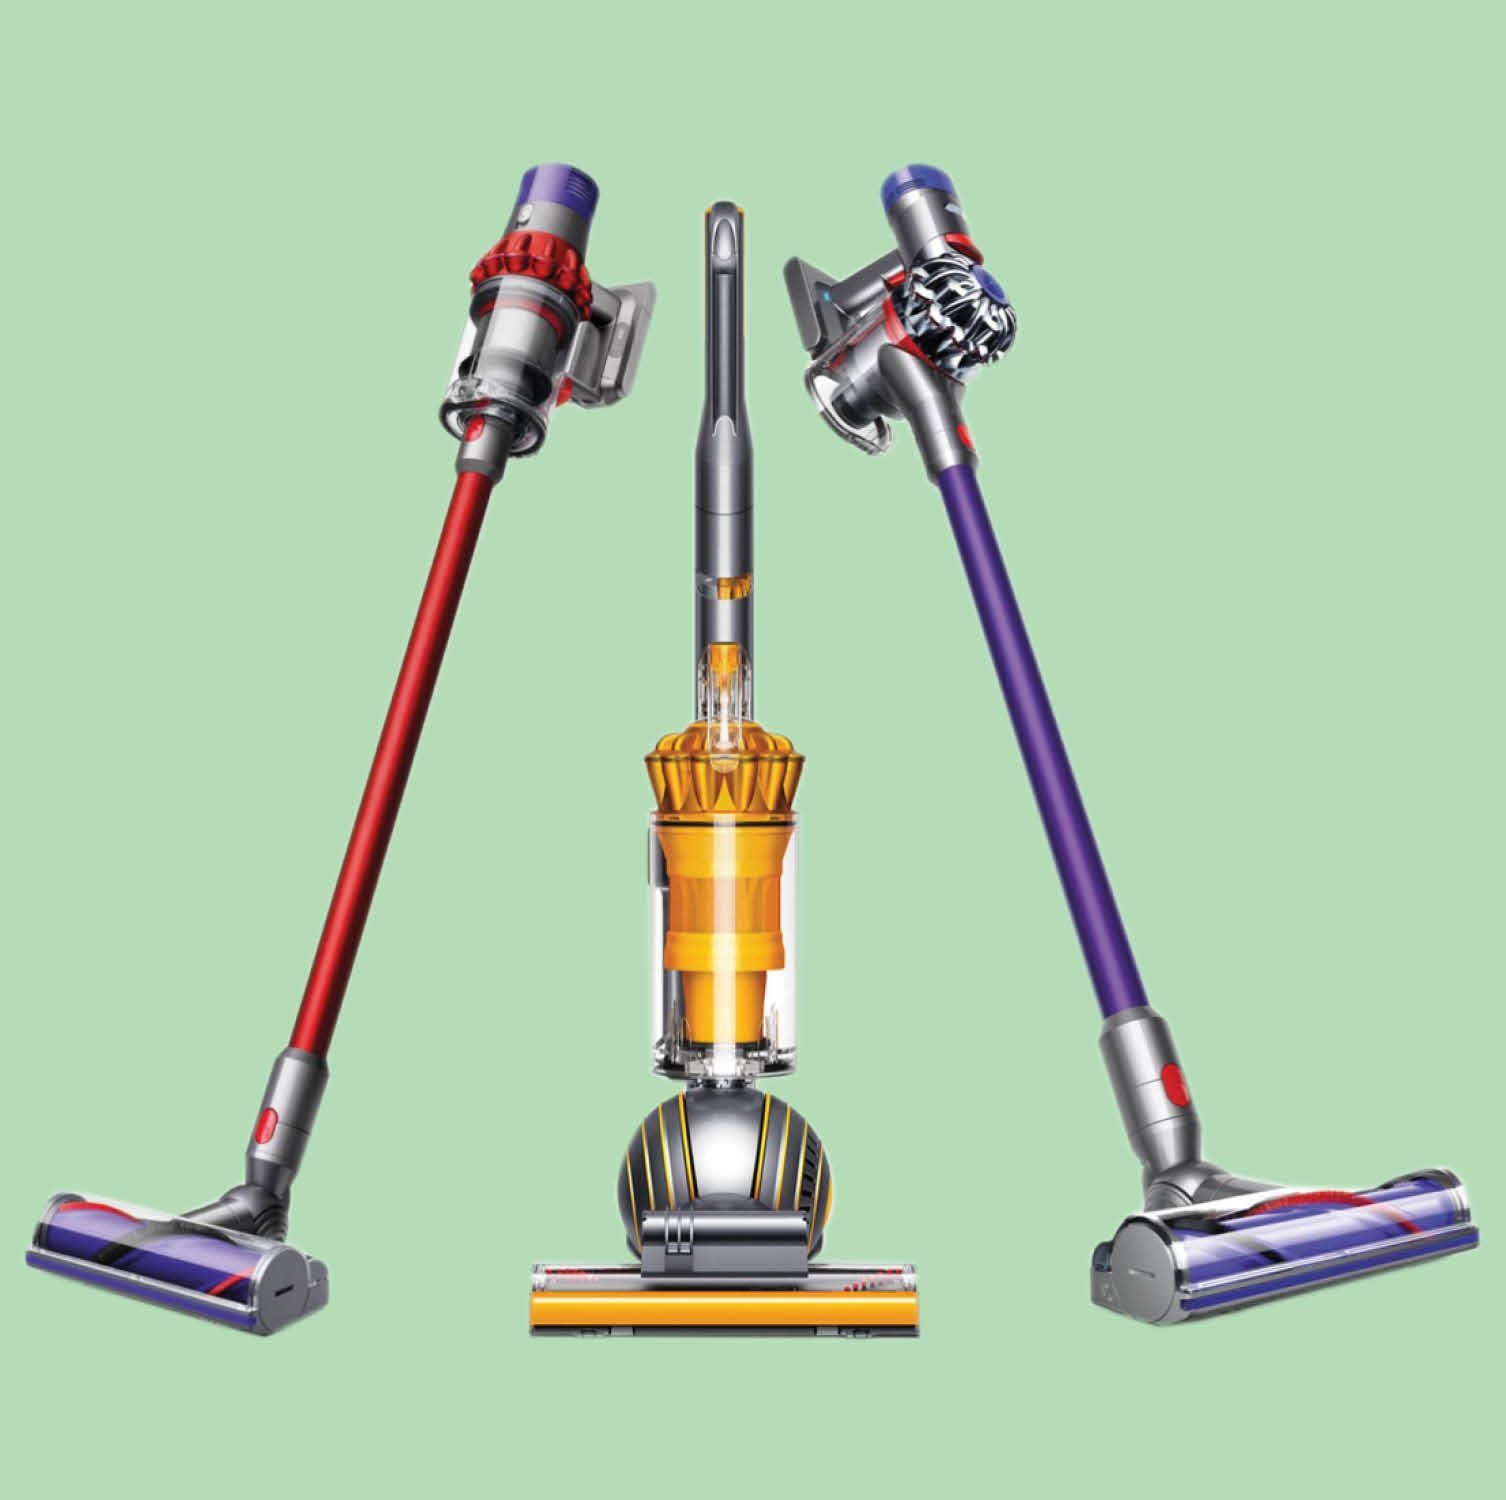 Here's How to Save up to $250 Off a Dyson Vacuum Before Black Friday